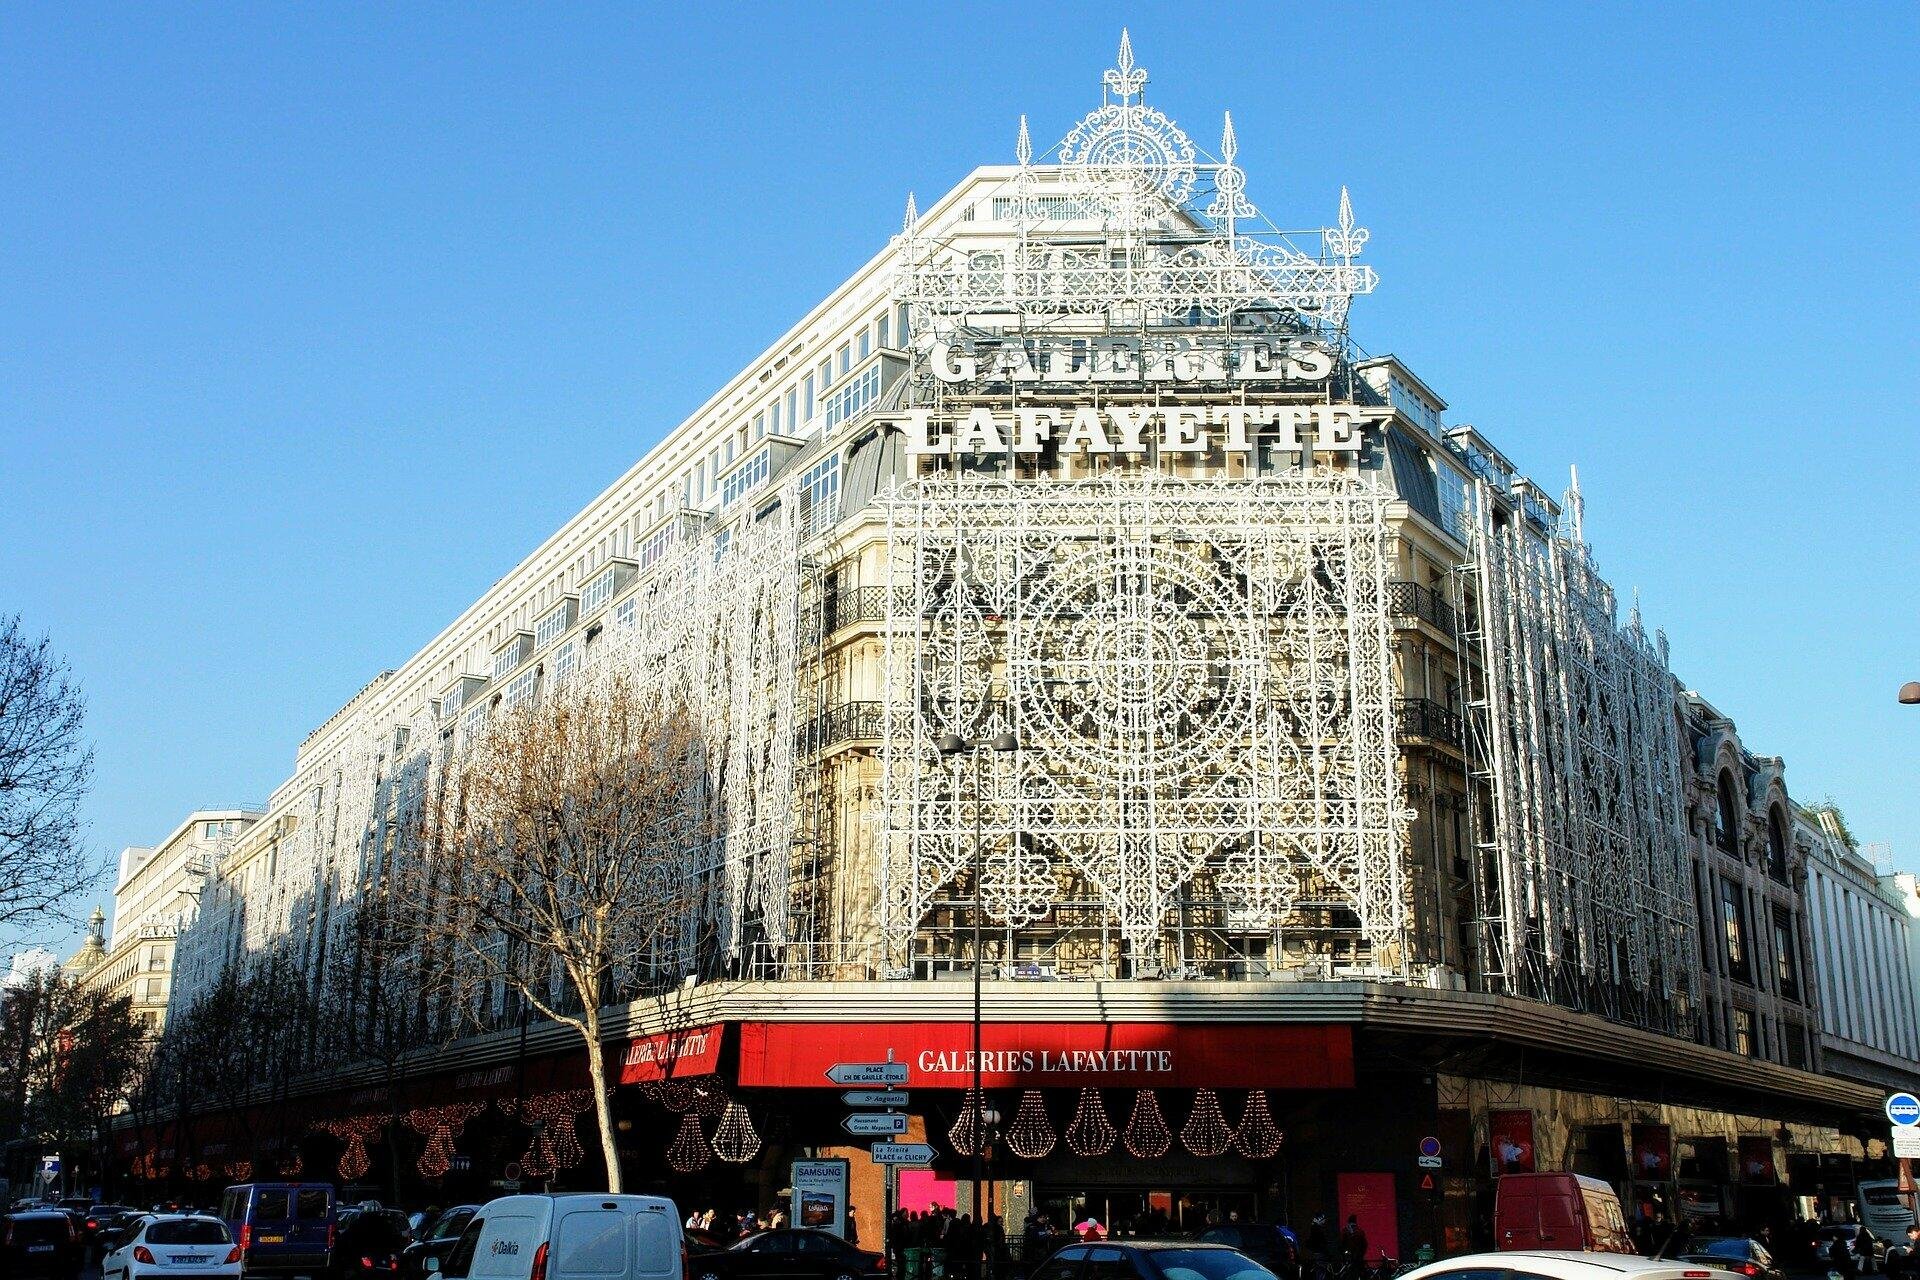 Galeries Lafayette in 9th Arrondissement - Tours and Activities